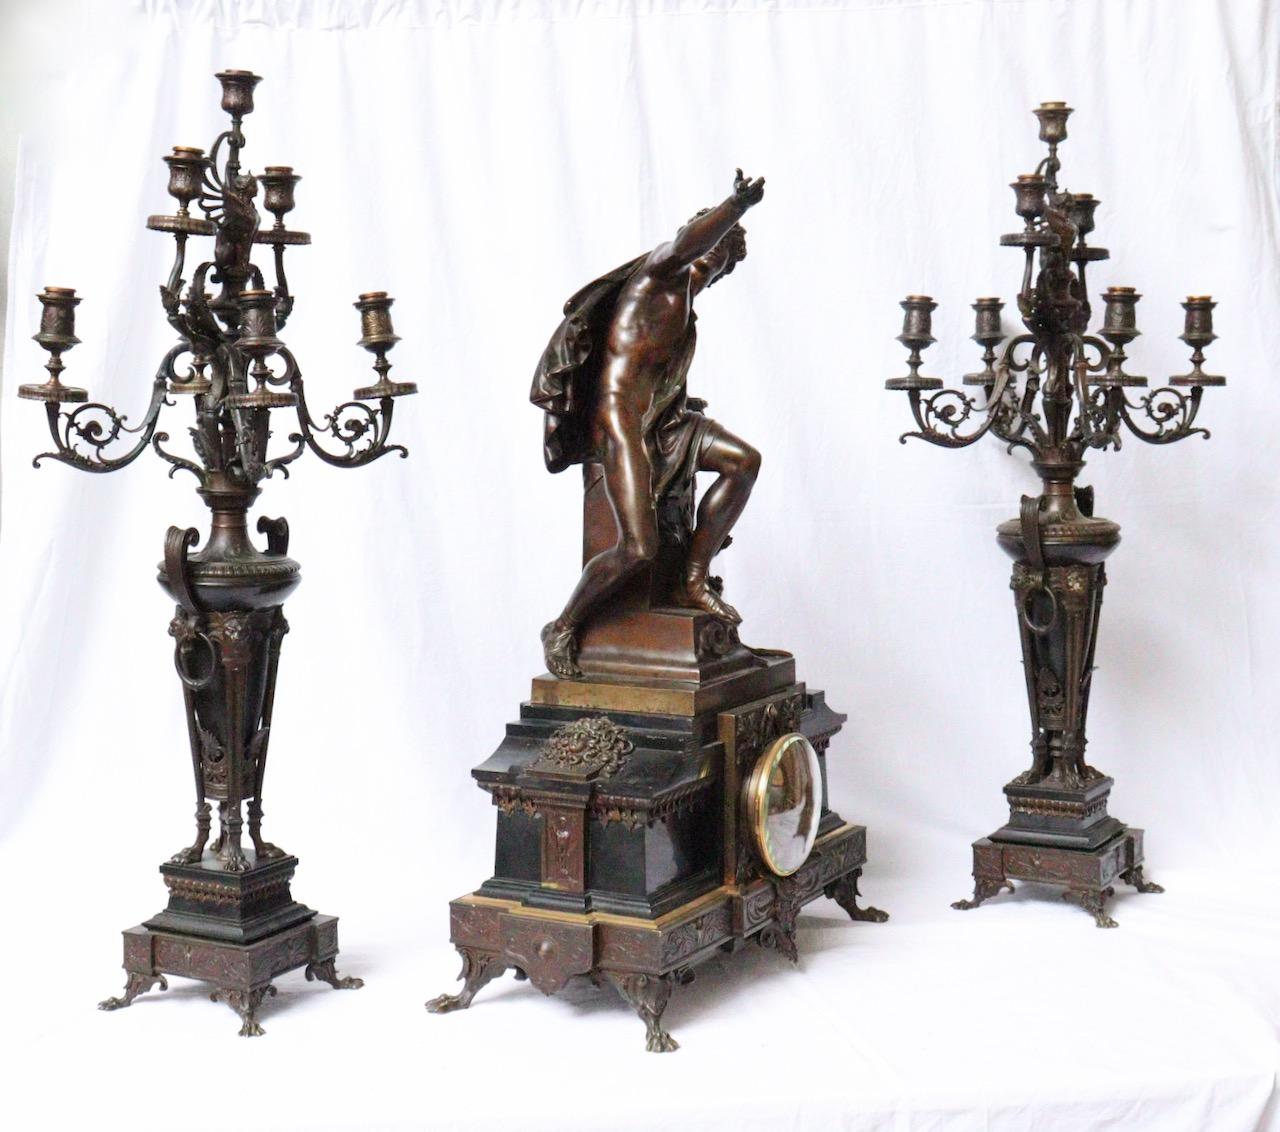 An Impressive 19th century French Marnyhac & Cie and Mathurin Moreau Three-pieces clock garniture

The Mantelpiece with APOLLON resting on the sacrificial tripod of the Pythia of Delphi in brown and gilt and black marble, the clock with central